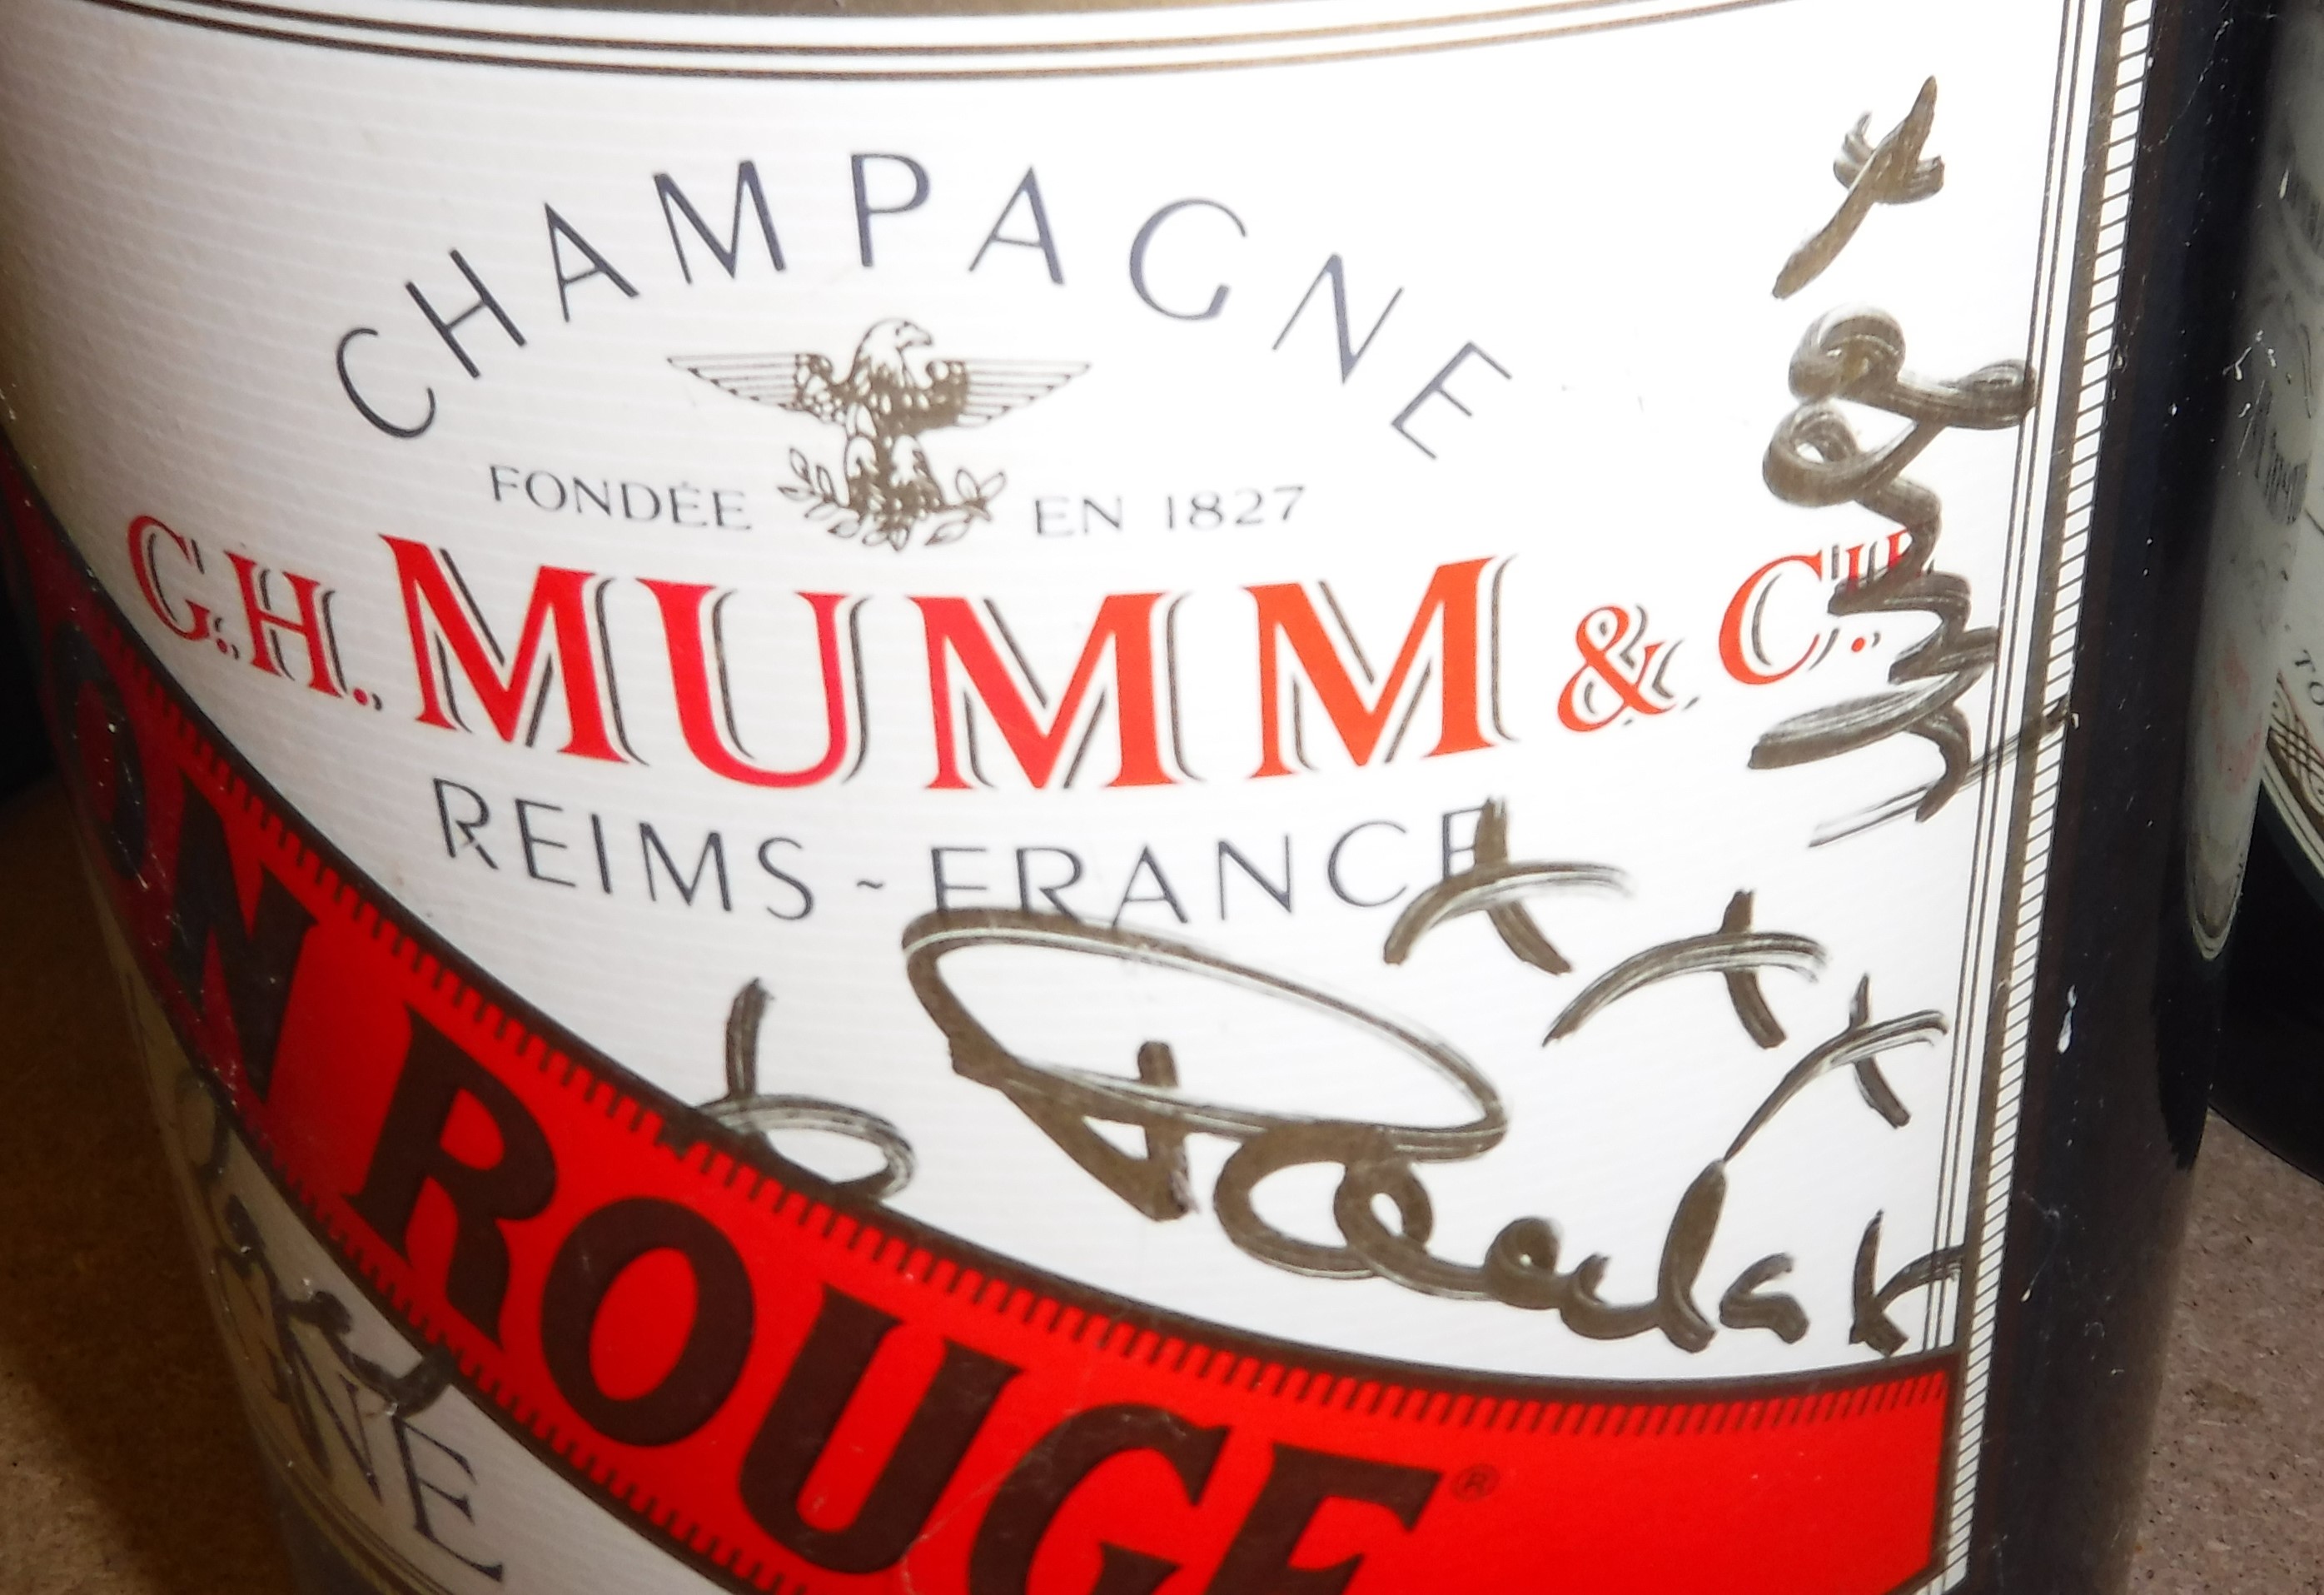 A collection of various vintage Champagne / wine bottles including a Moet et Chandon signed by - Image 2 of 5